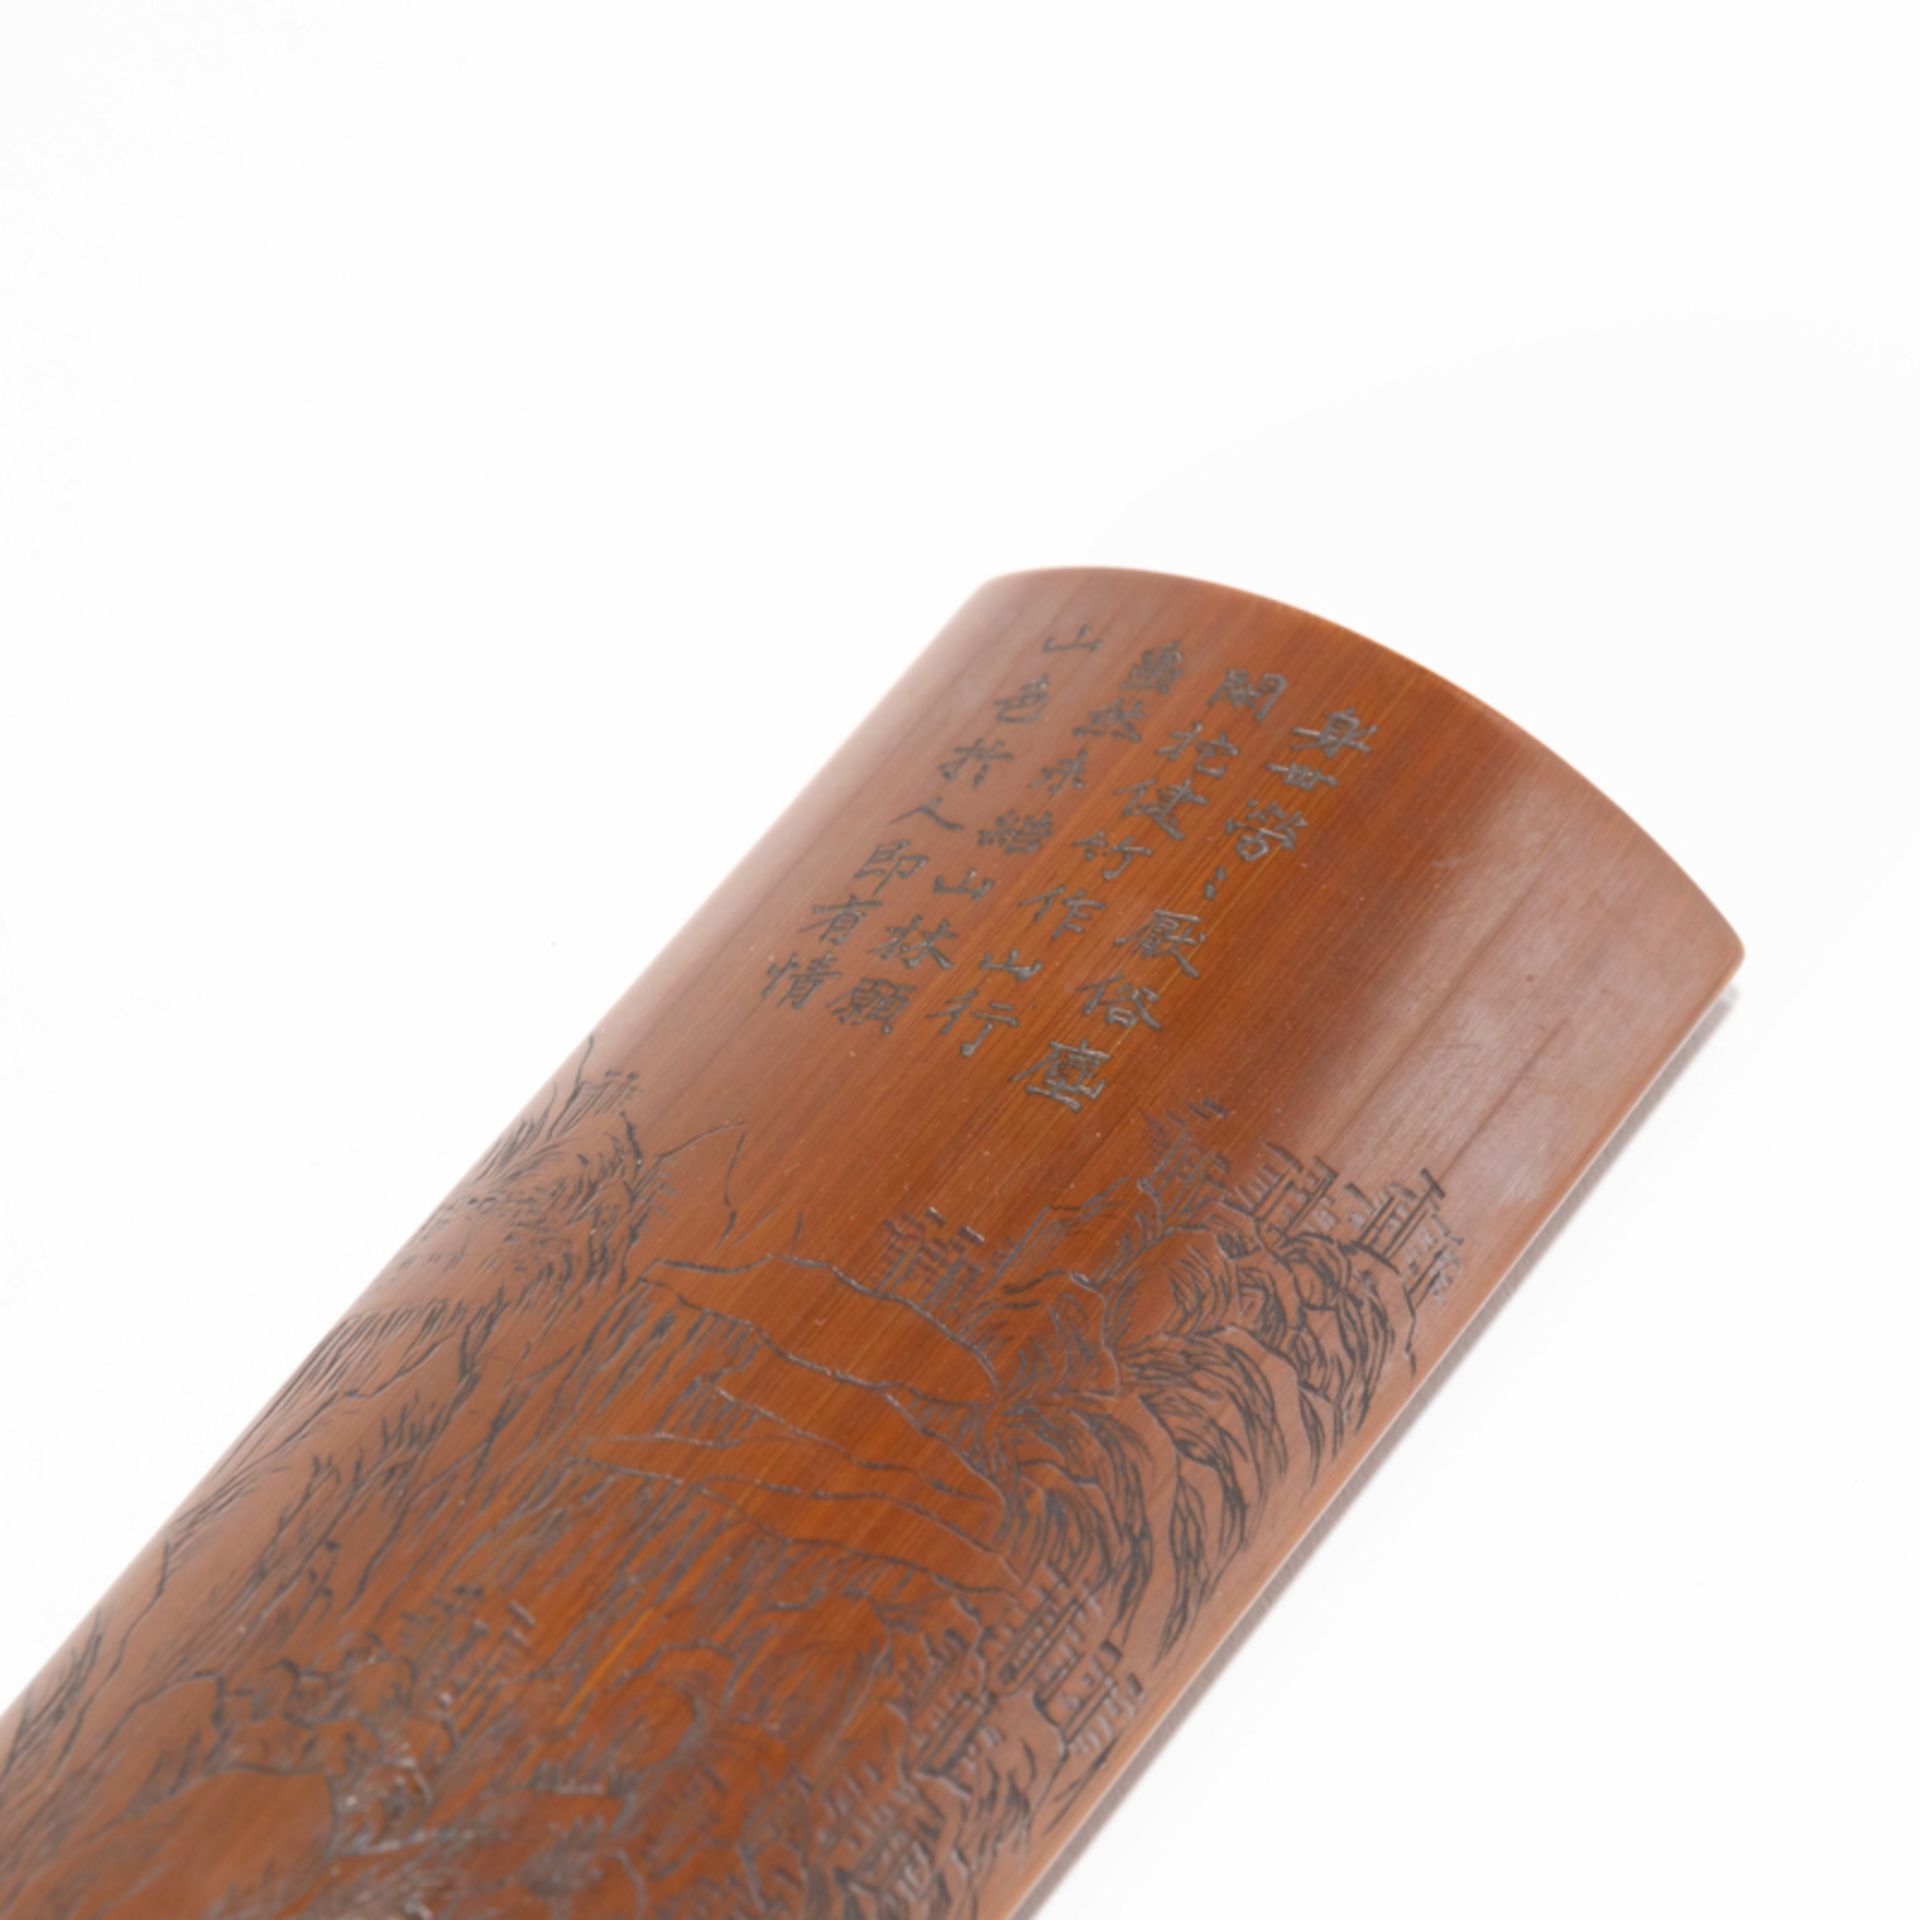 A CHINESE BAMBOO 'LANDSCAPE AND POEM' WRIST REST, QING DYNASTY - Image 5 of 9